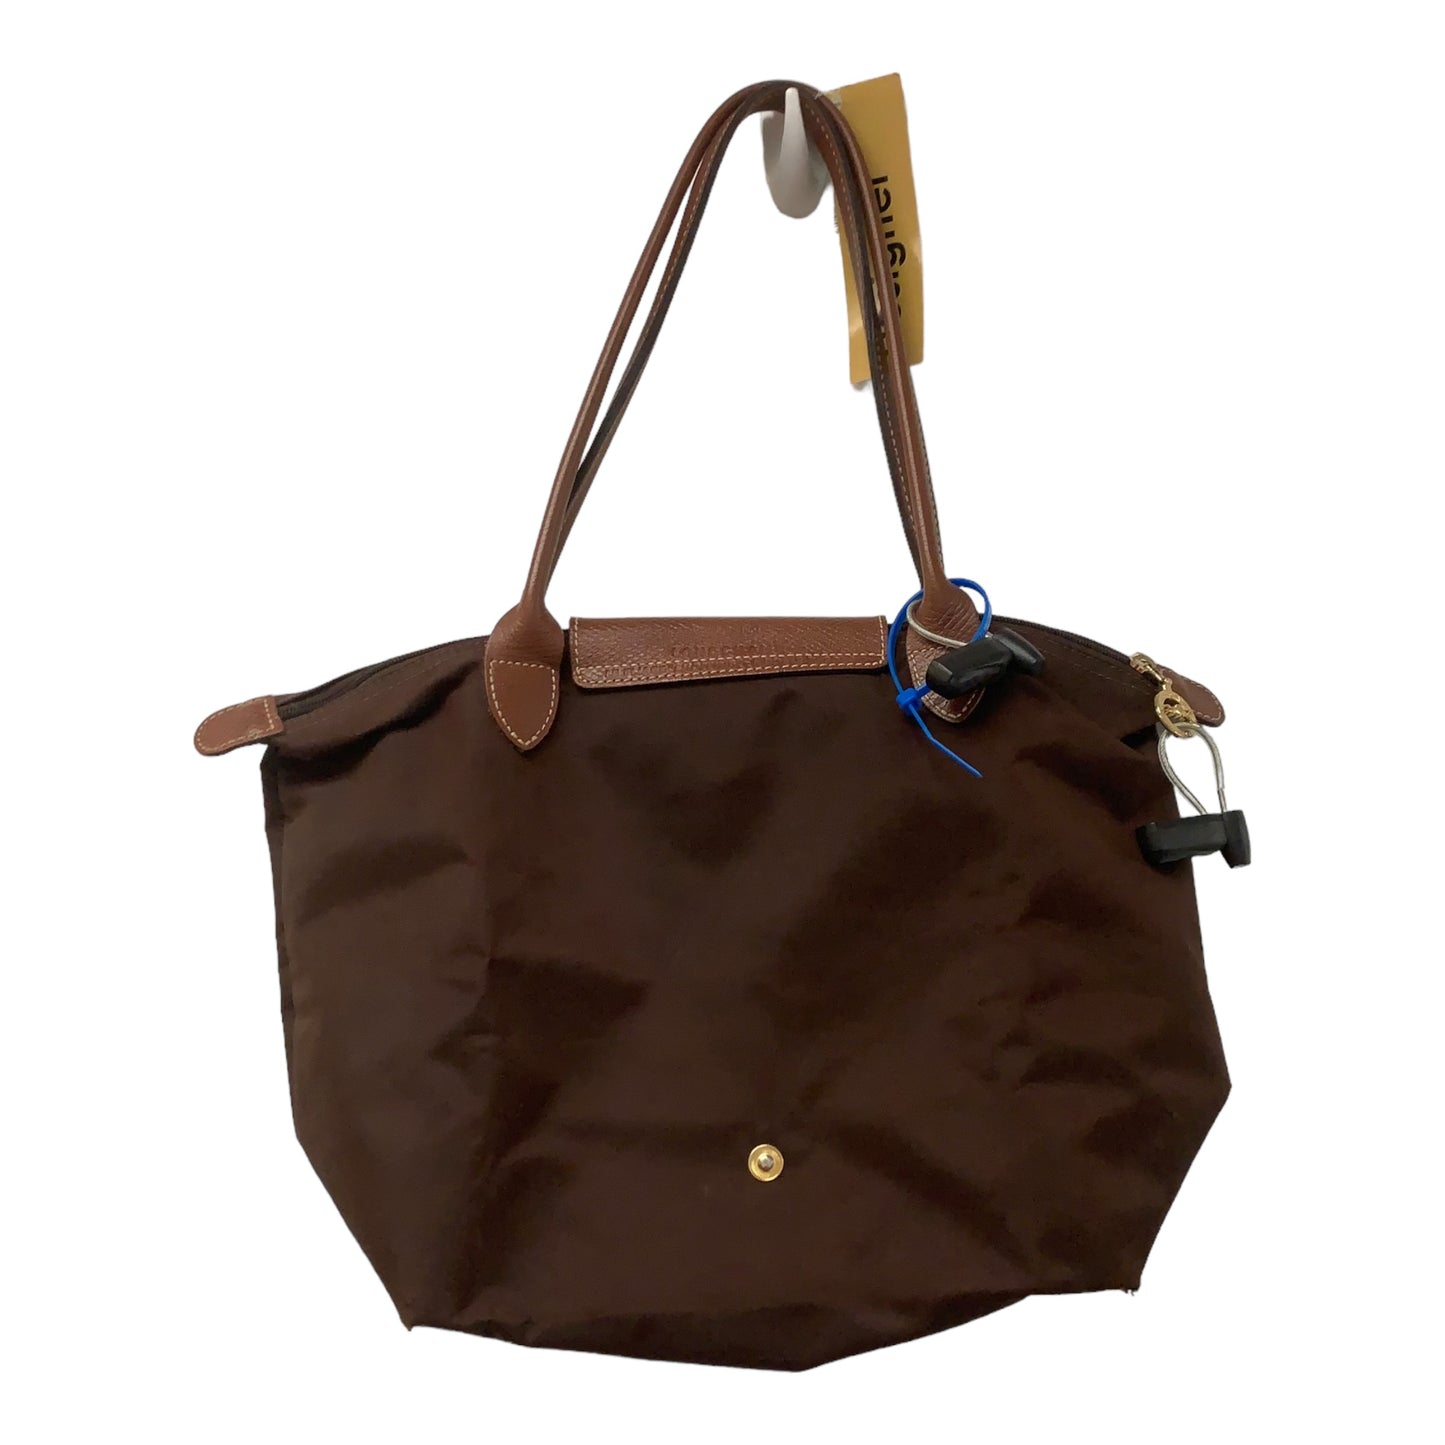 Tote Designer By Longchamp  Size: Small